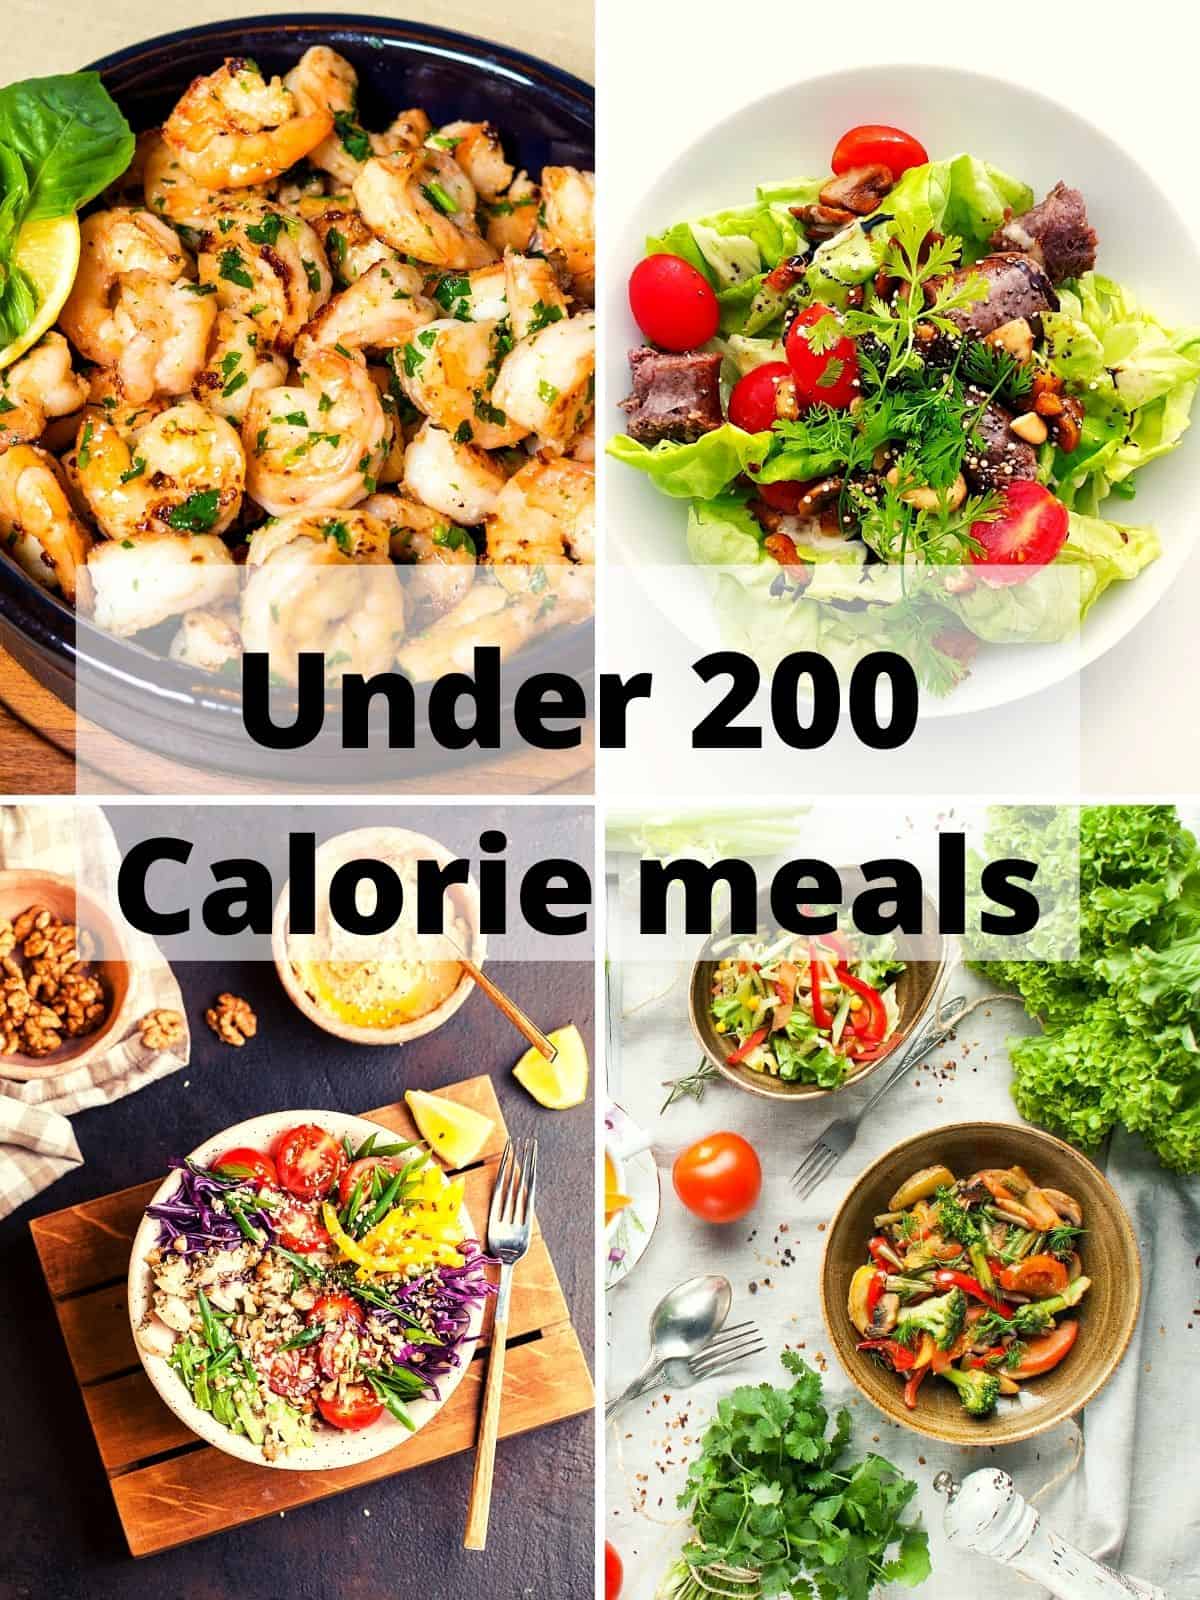 meals under 200 calories for lunch, dinner or breakfast